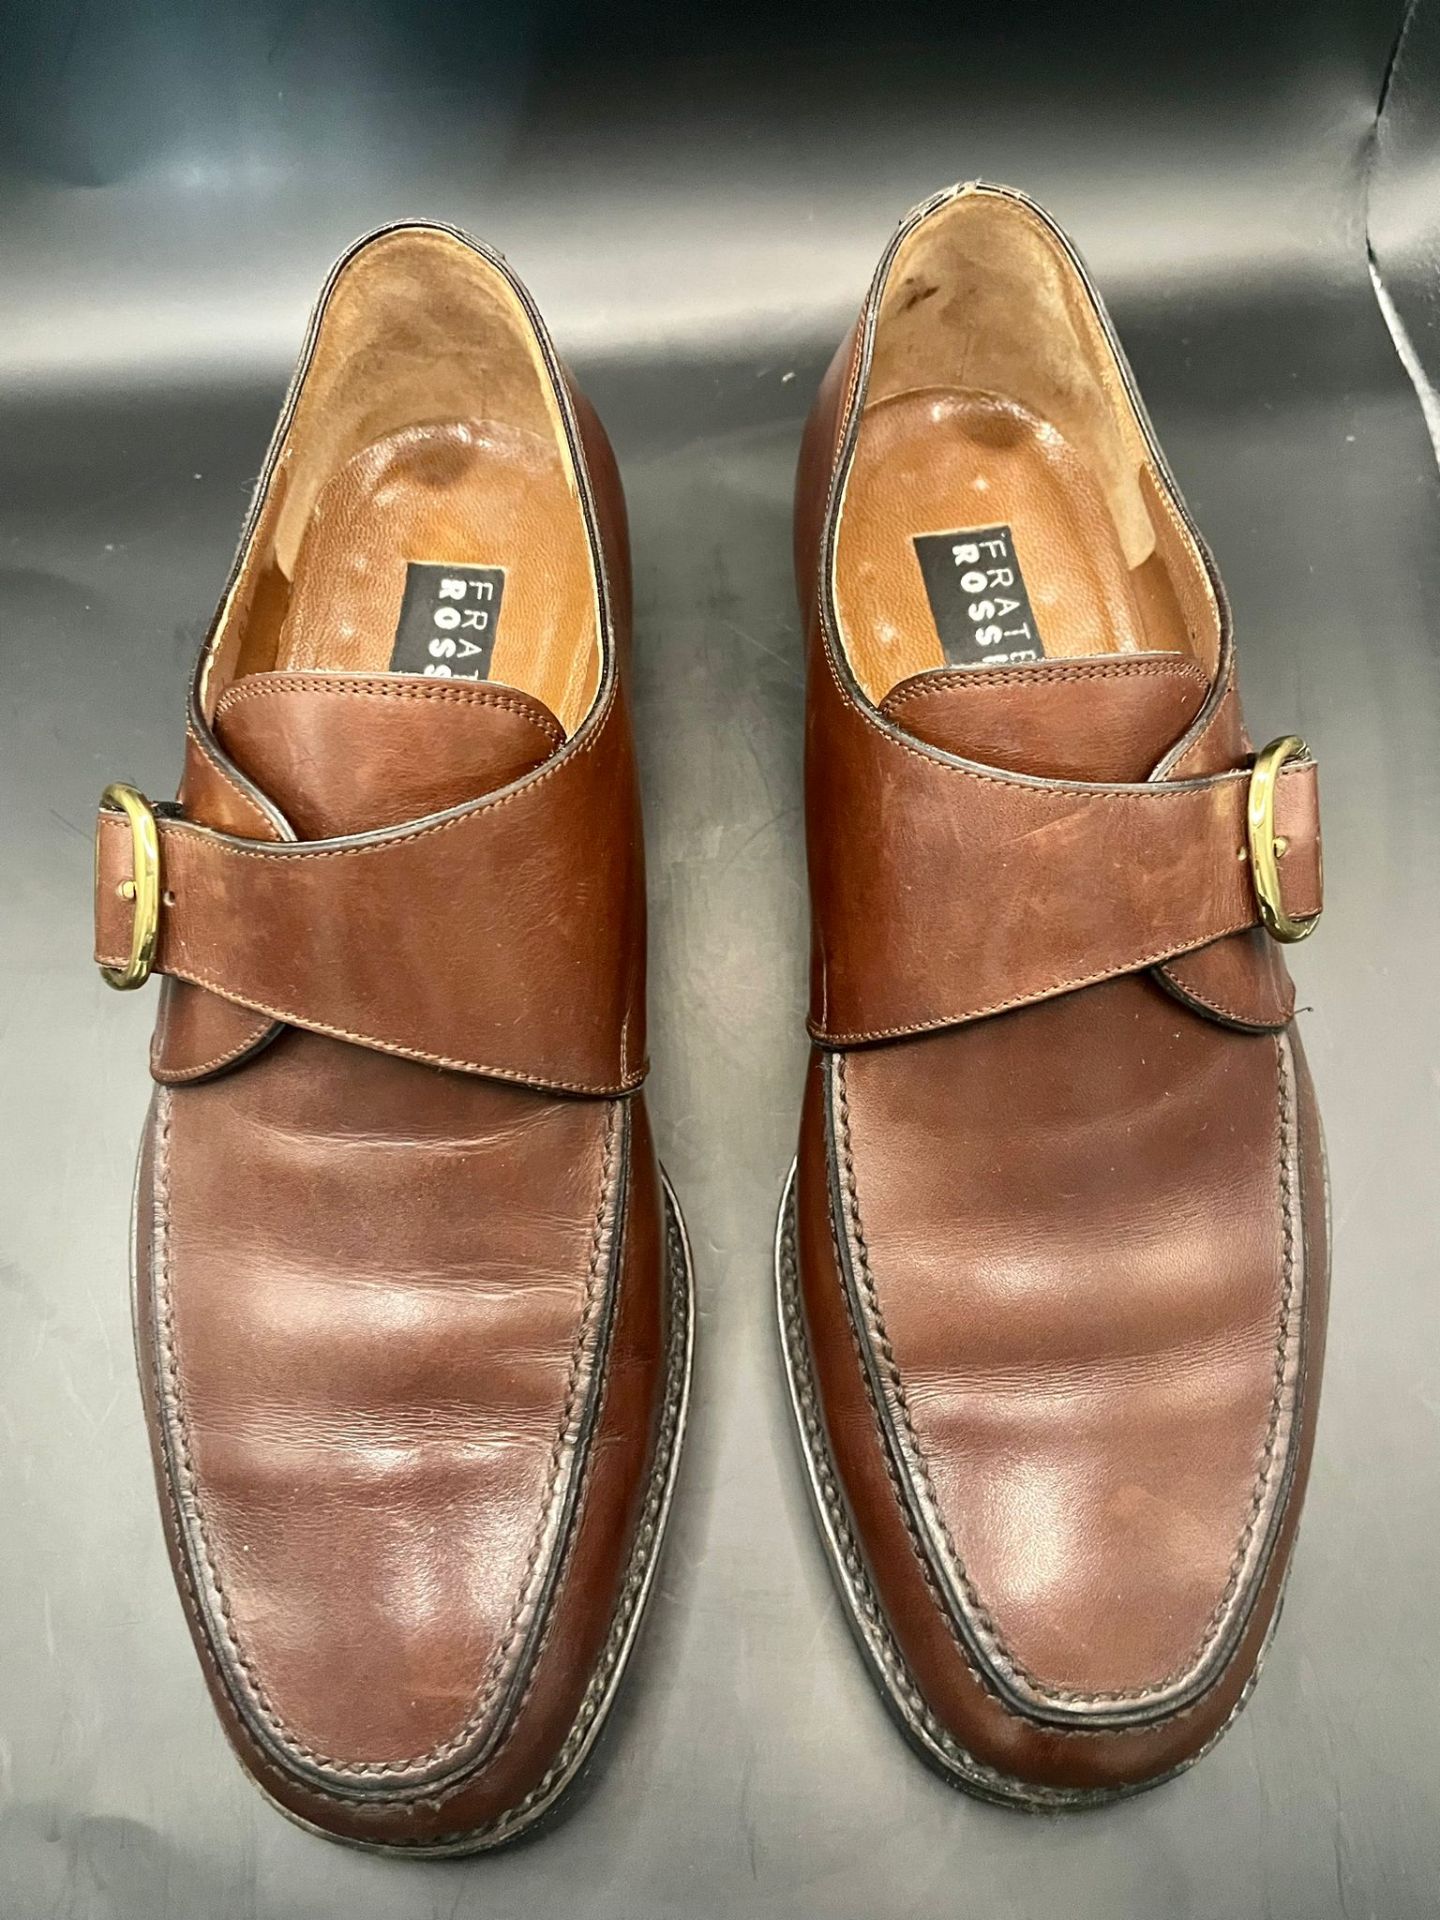 Fratelli Rossetti Monk Strap leather shoes size 7 with good soles. Good condition please see photos  - Image 11 of 14